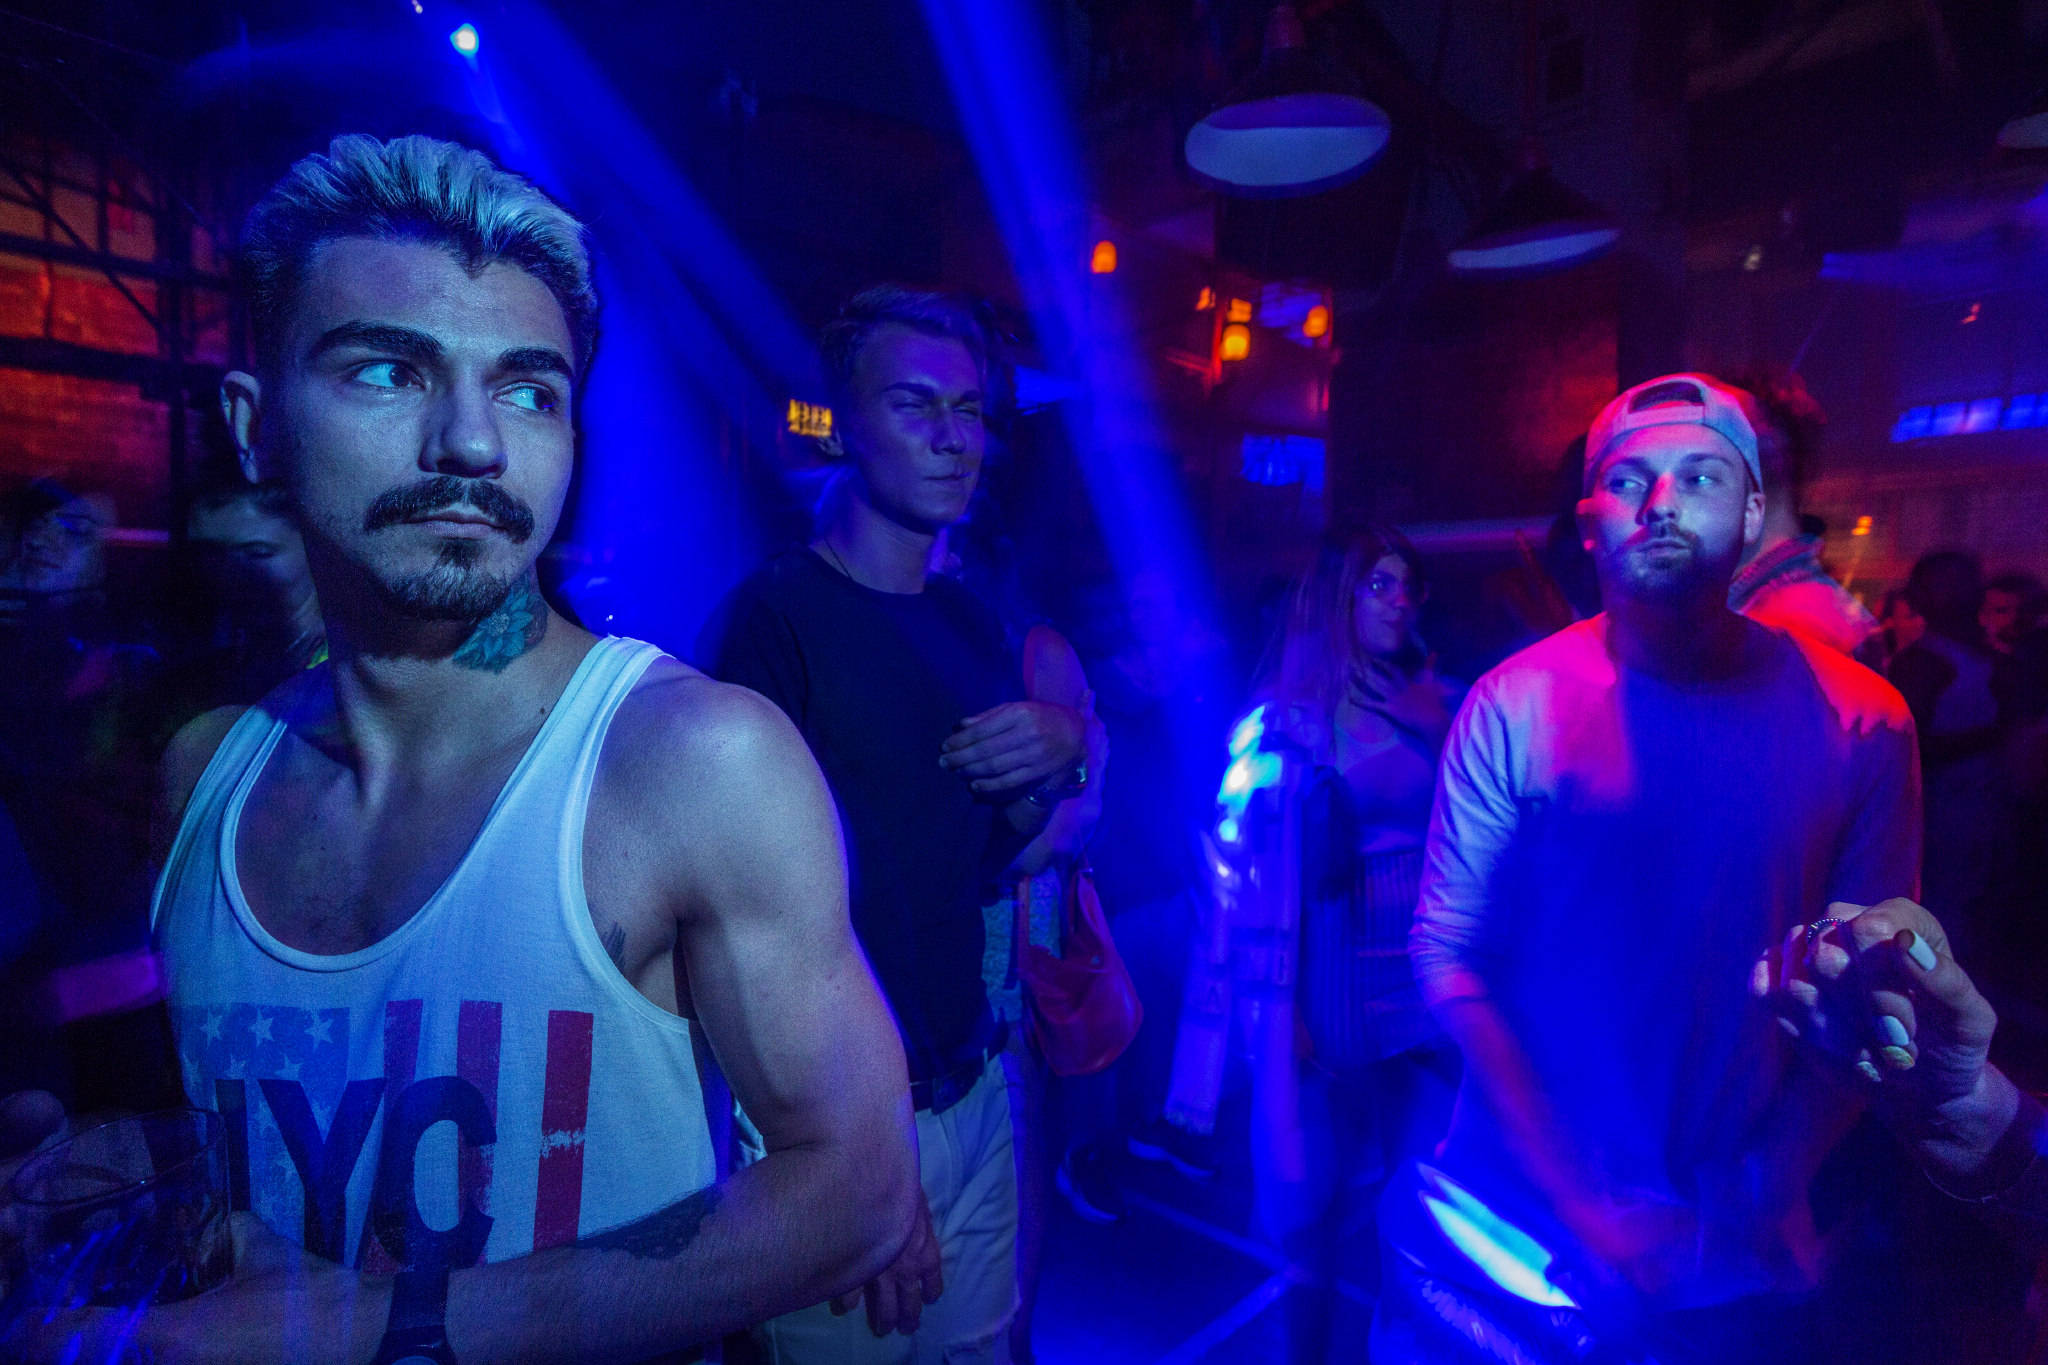  At Propaganda, a popular club near the Kremlin in Moscow, Sunday is gay night, an event that draws heterosexual men and women as well. After the fall of the Soviet Union, many Russians began to more openly express their sexual orientation and demand